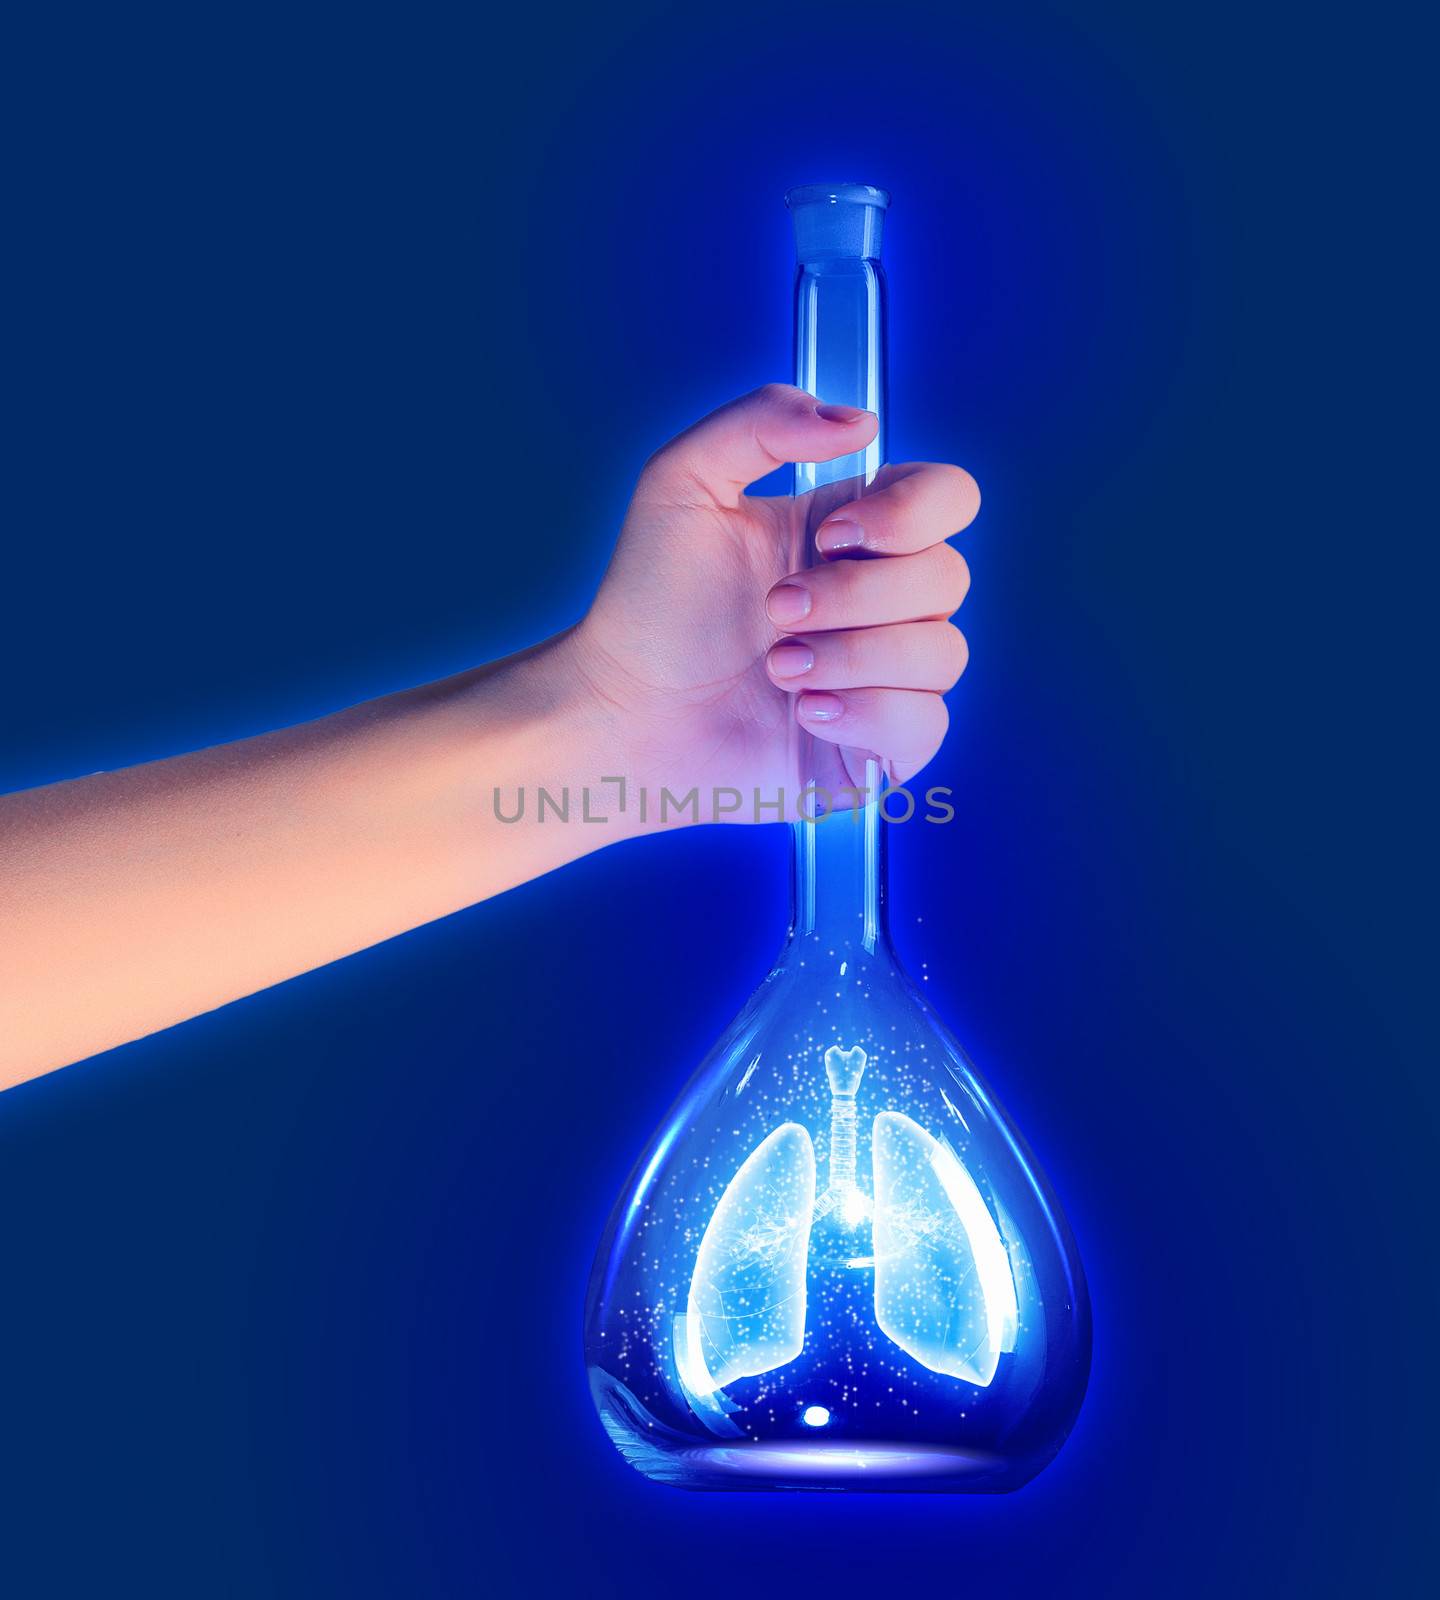 Human lungs in test tube by sergey_nivens